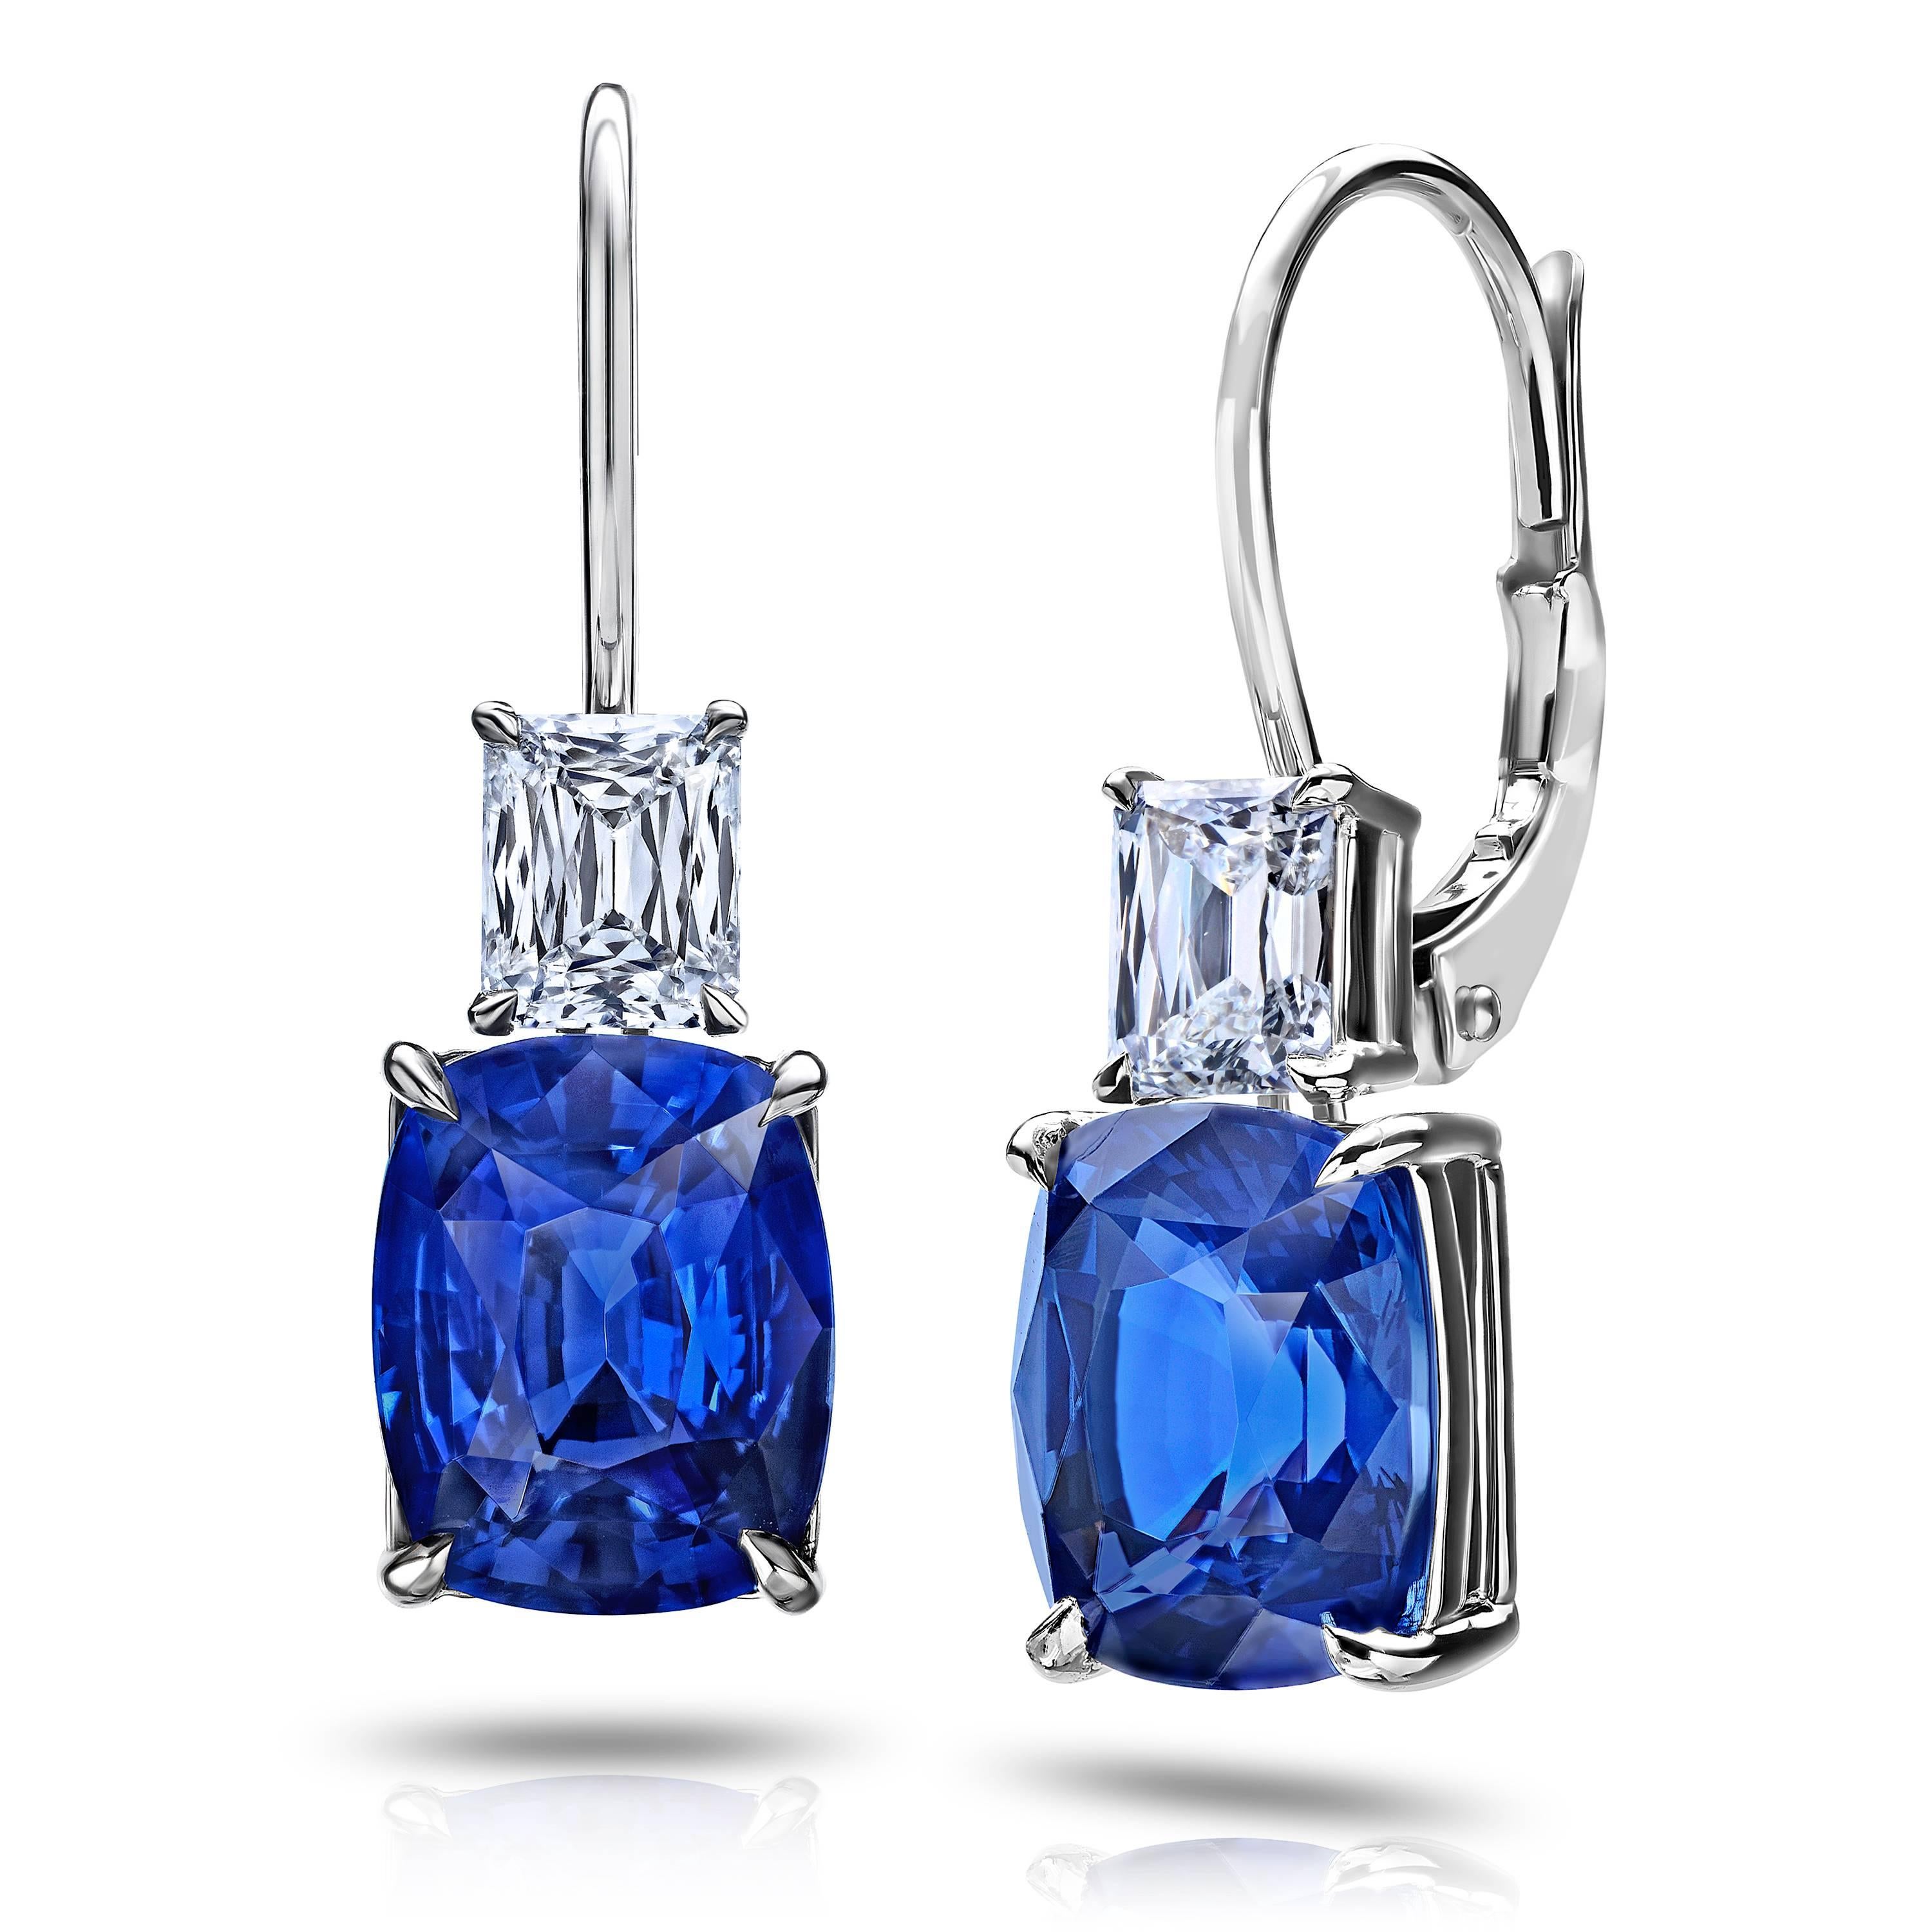 Two cushion cut blue sapphires 6.80 carats (CDC report) and 2 cushion cut diamonds 1.06 carats set in platinum drop earrings.